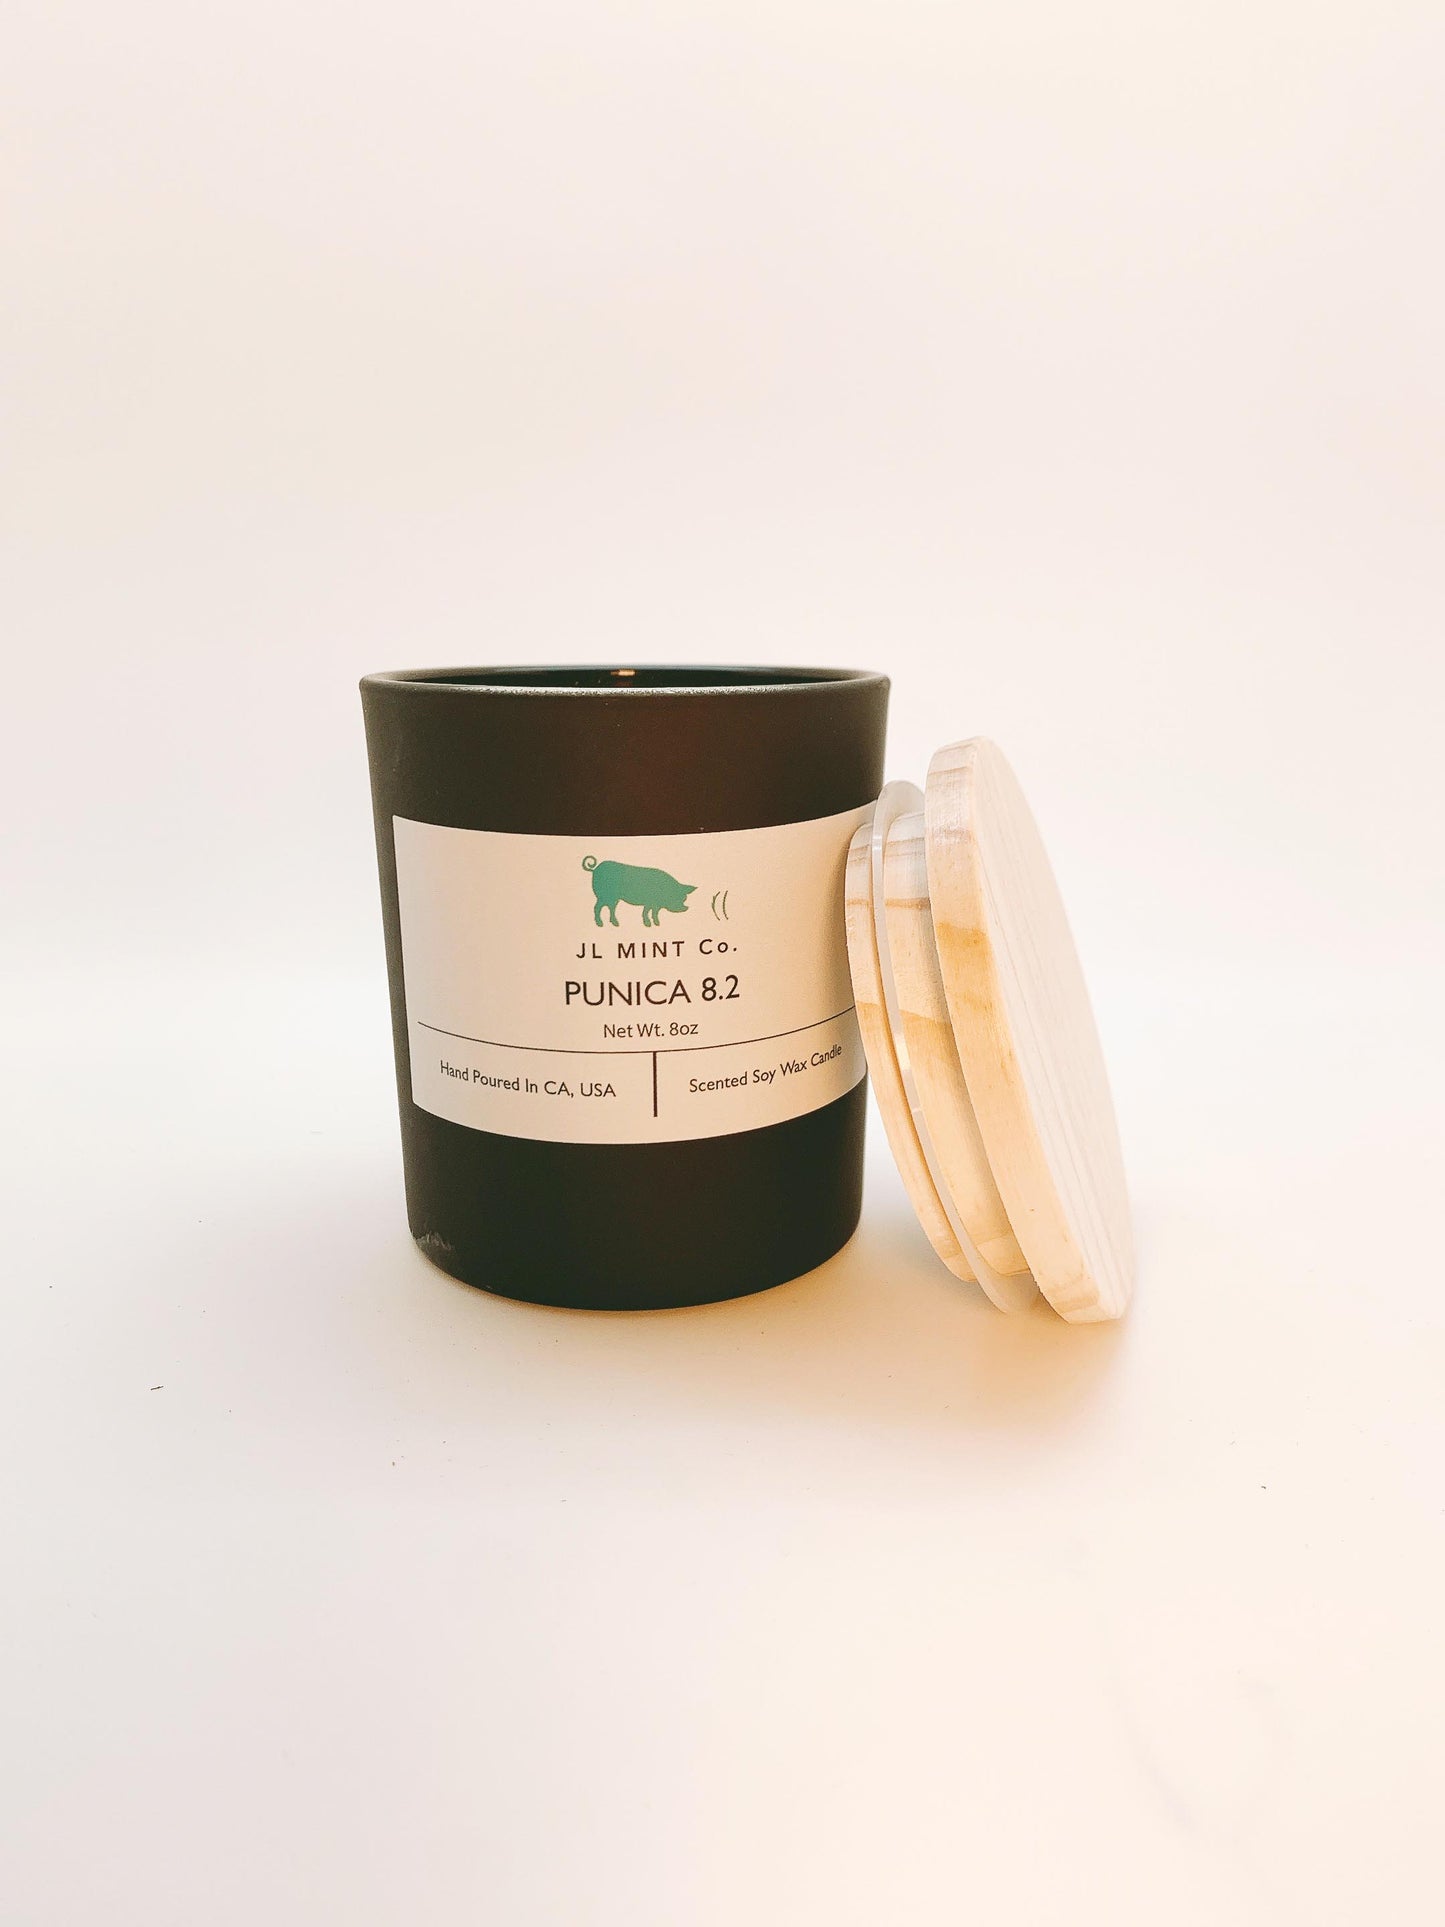 PUNICA 8.2 JL Mint Co. Soy Wax Candle